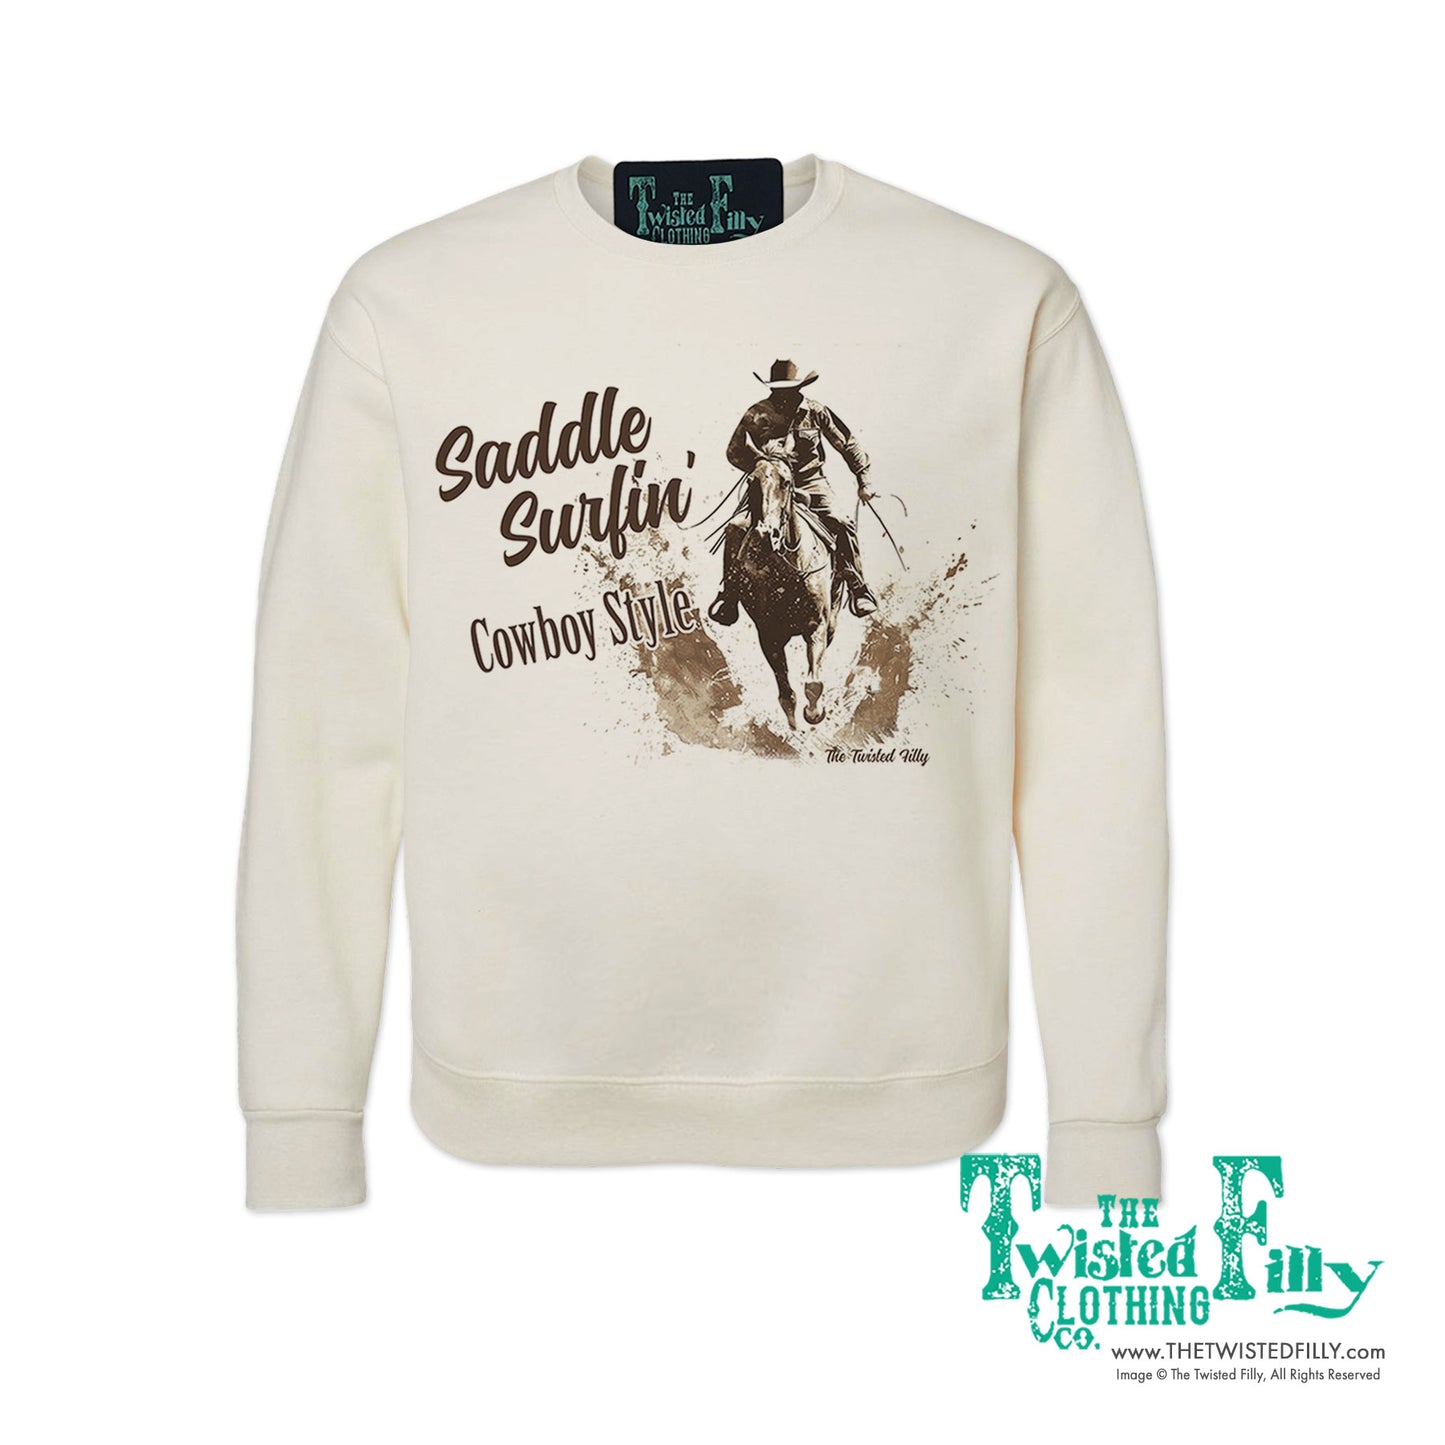 Saddle Surfin' Cowboy Style - Adult Mens Sweatshirt - Assorted Colors